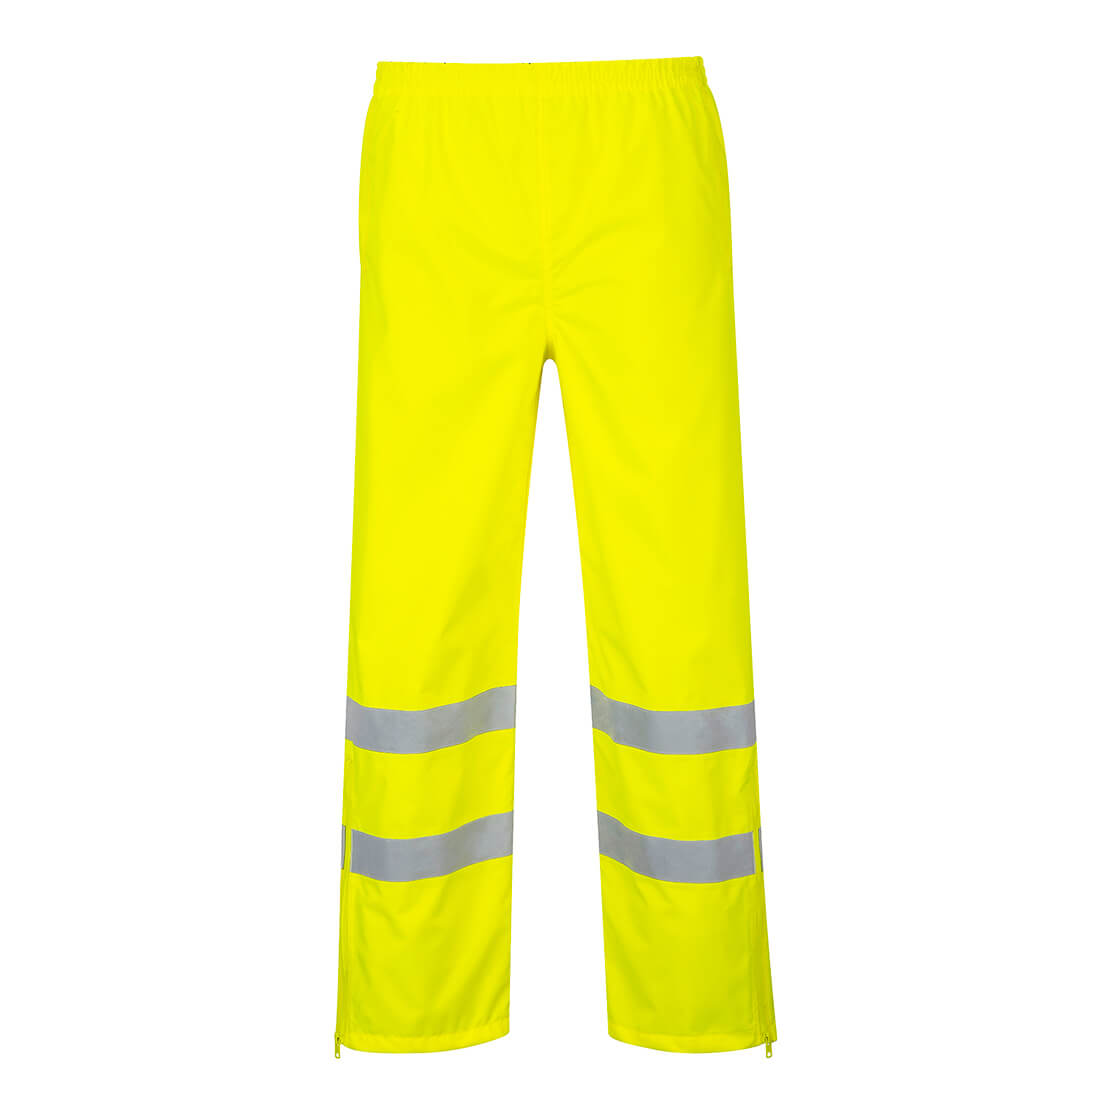 Image of Oxford Weave 300D Class 1 Breathable Hi Vis Breathable Trousers Yellow 3XL